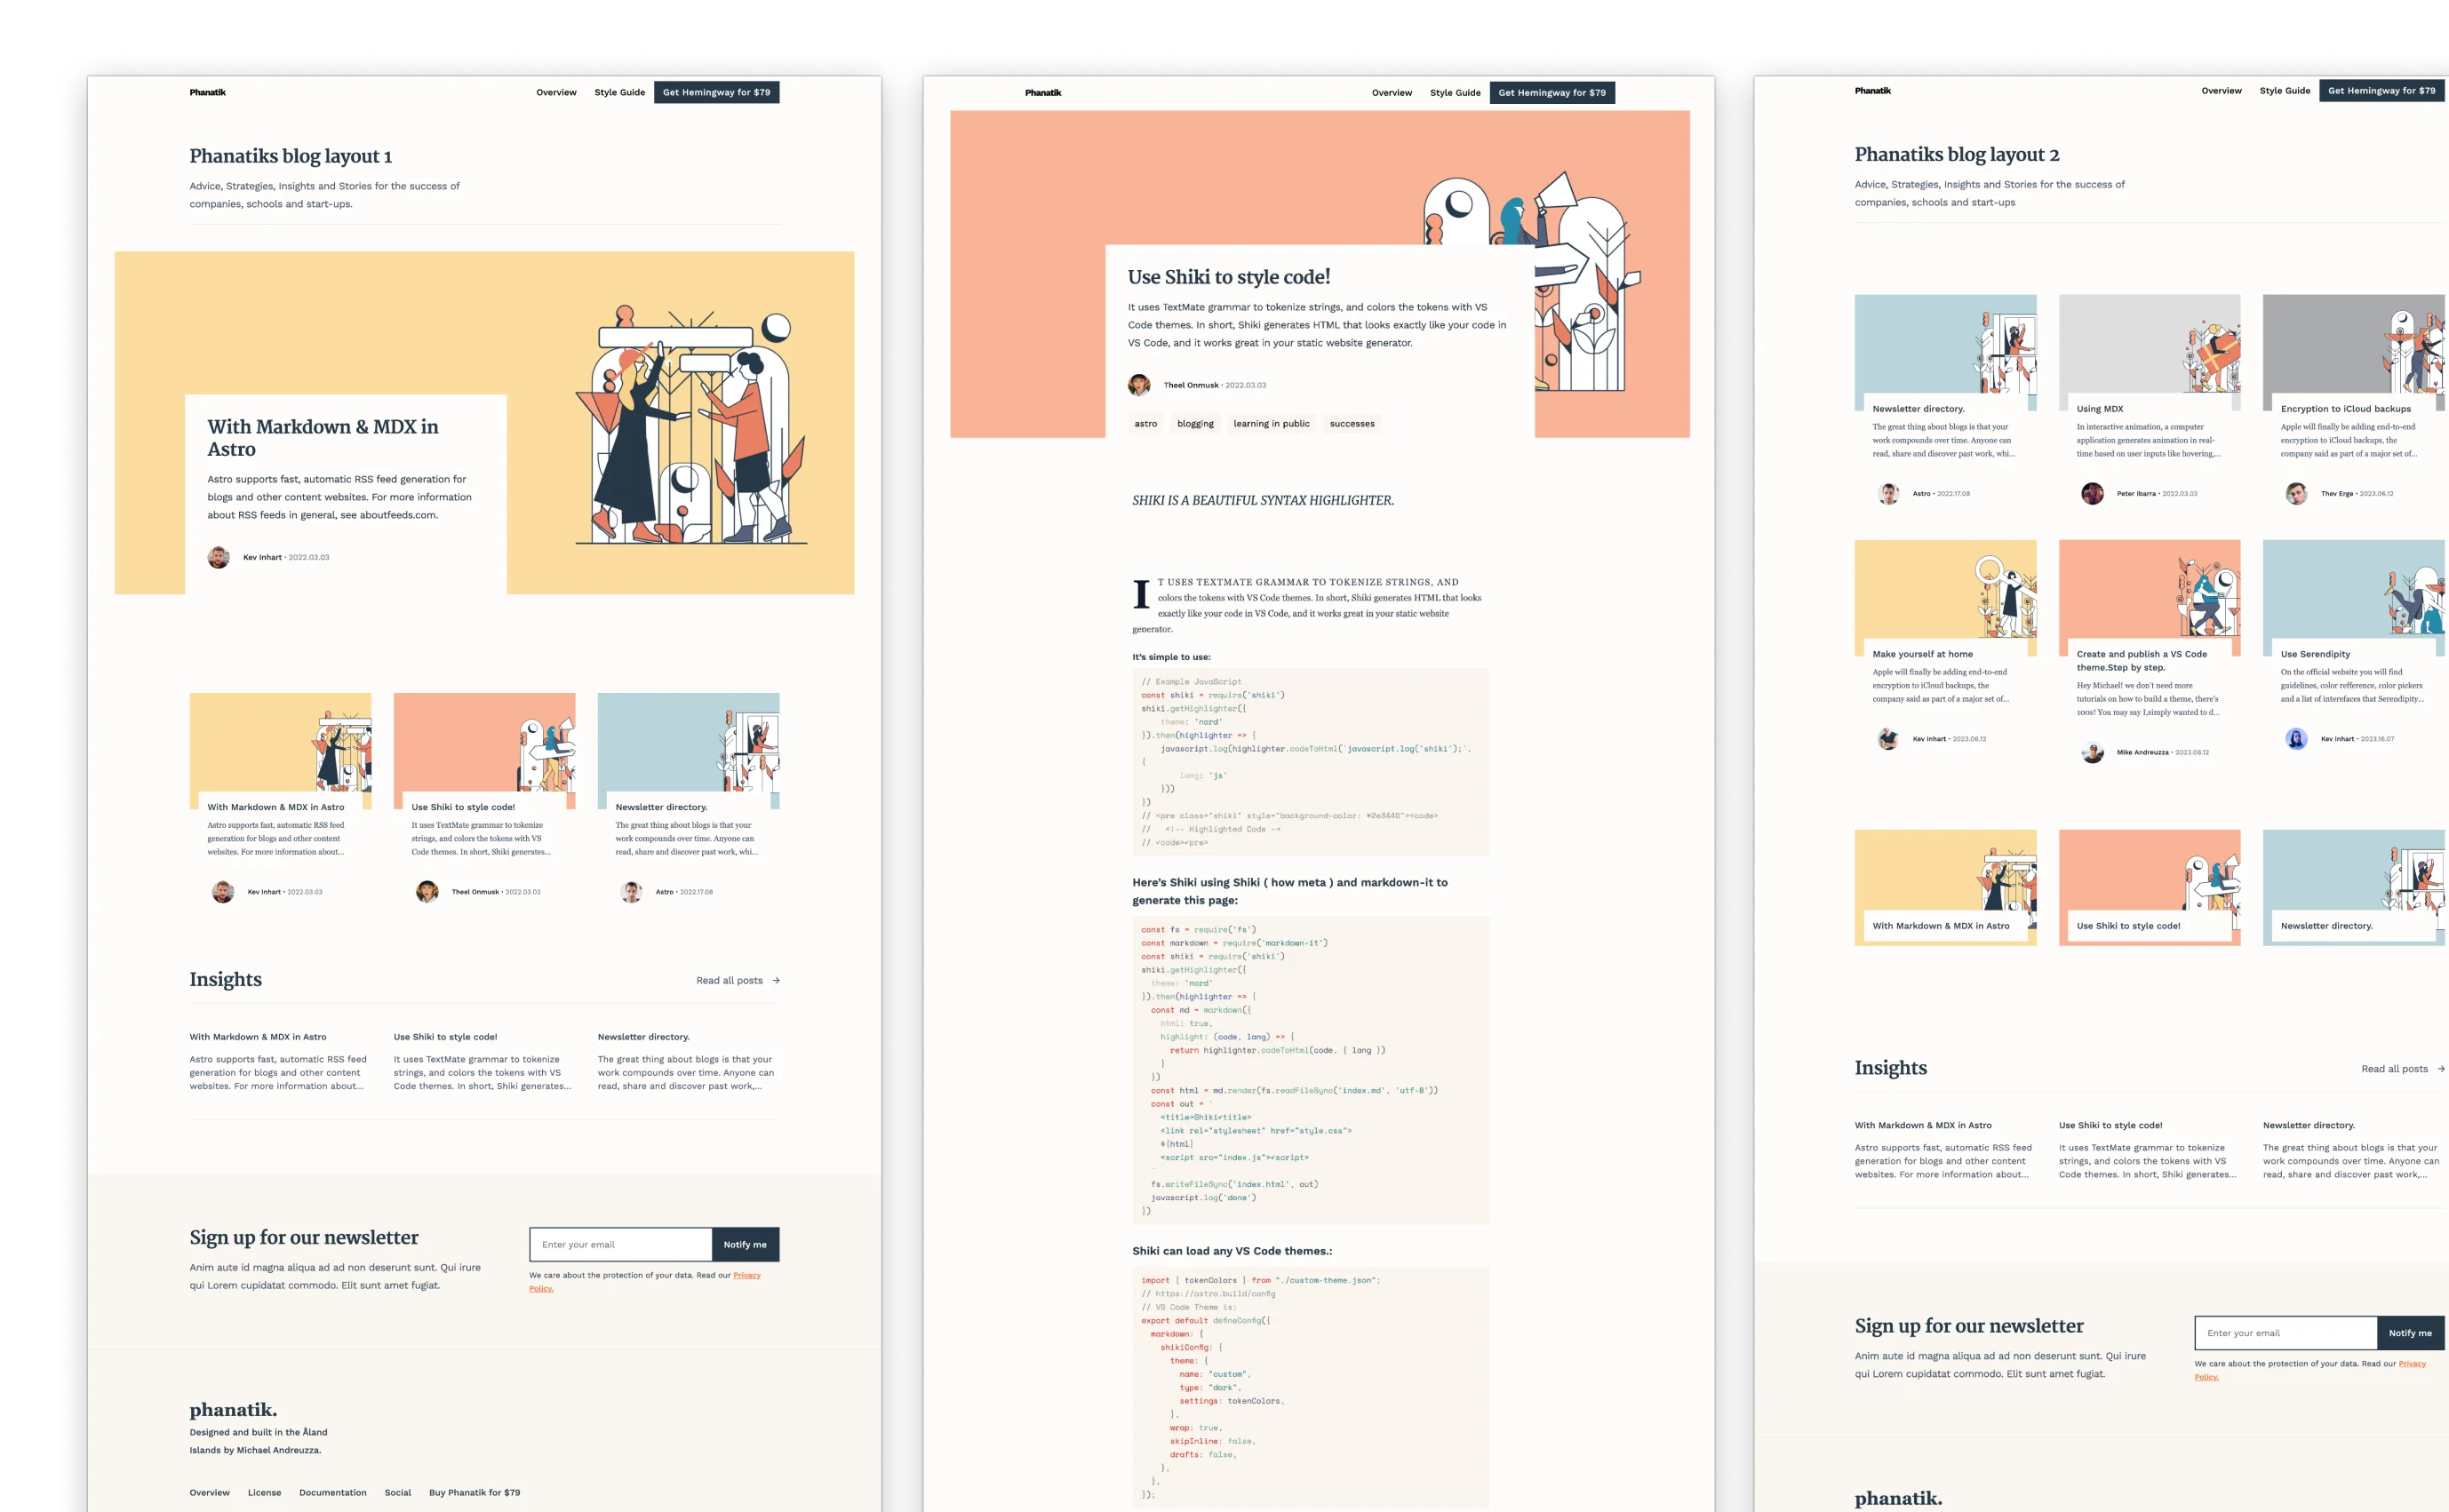 Phanatik blog layout version 1, featuring a vibrant mix of yellow and coral colors with illustrations. Articles on Markdown, MDX in Astro, and styling code with Shiki are presented alongside insights and tips for developers. The page also includes a call to action for newsletter subscription at the bottom.